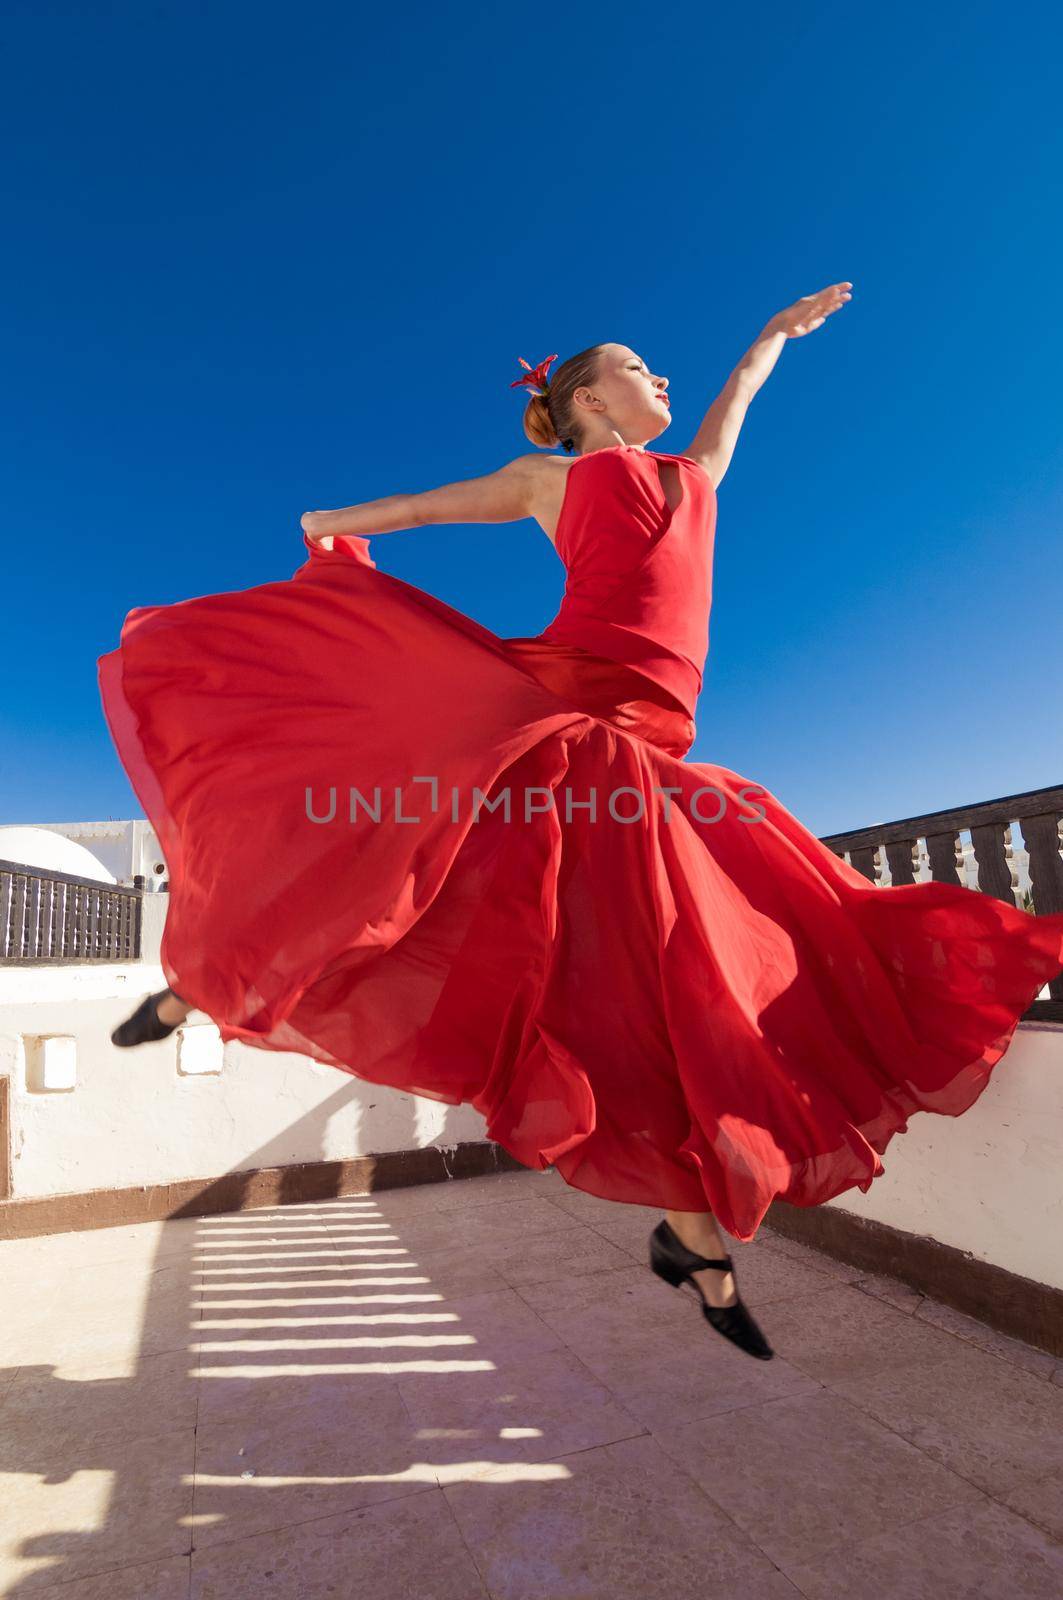 Attractive flamenco dancer wearing traditional red dress with flower in her hair